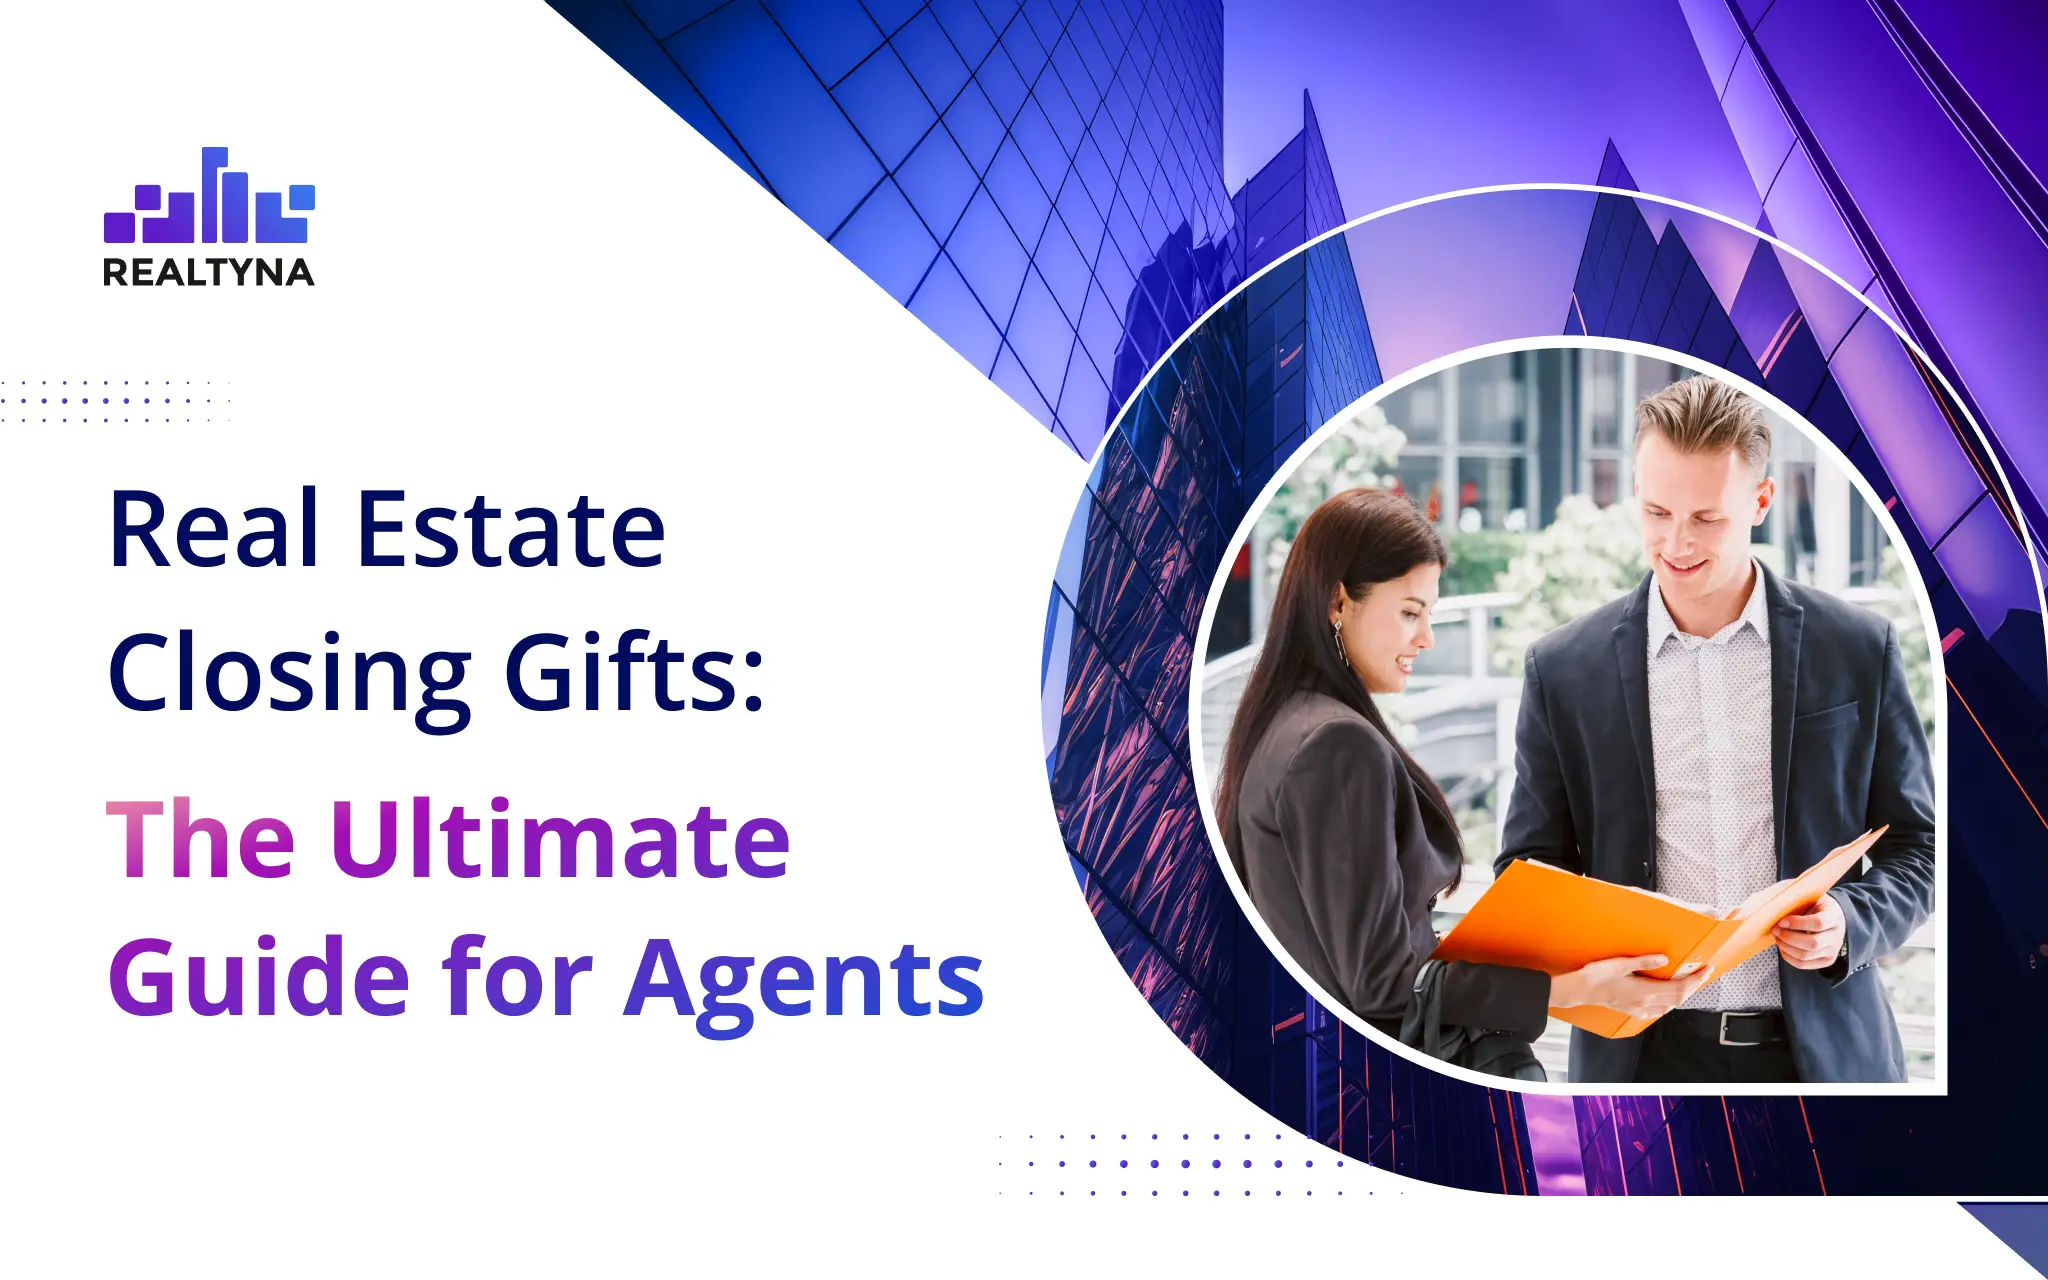 Real Estate Closing Gifts: The Ultimate Guide for Agents